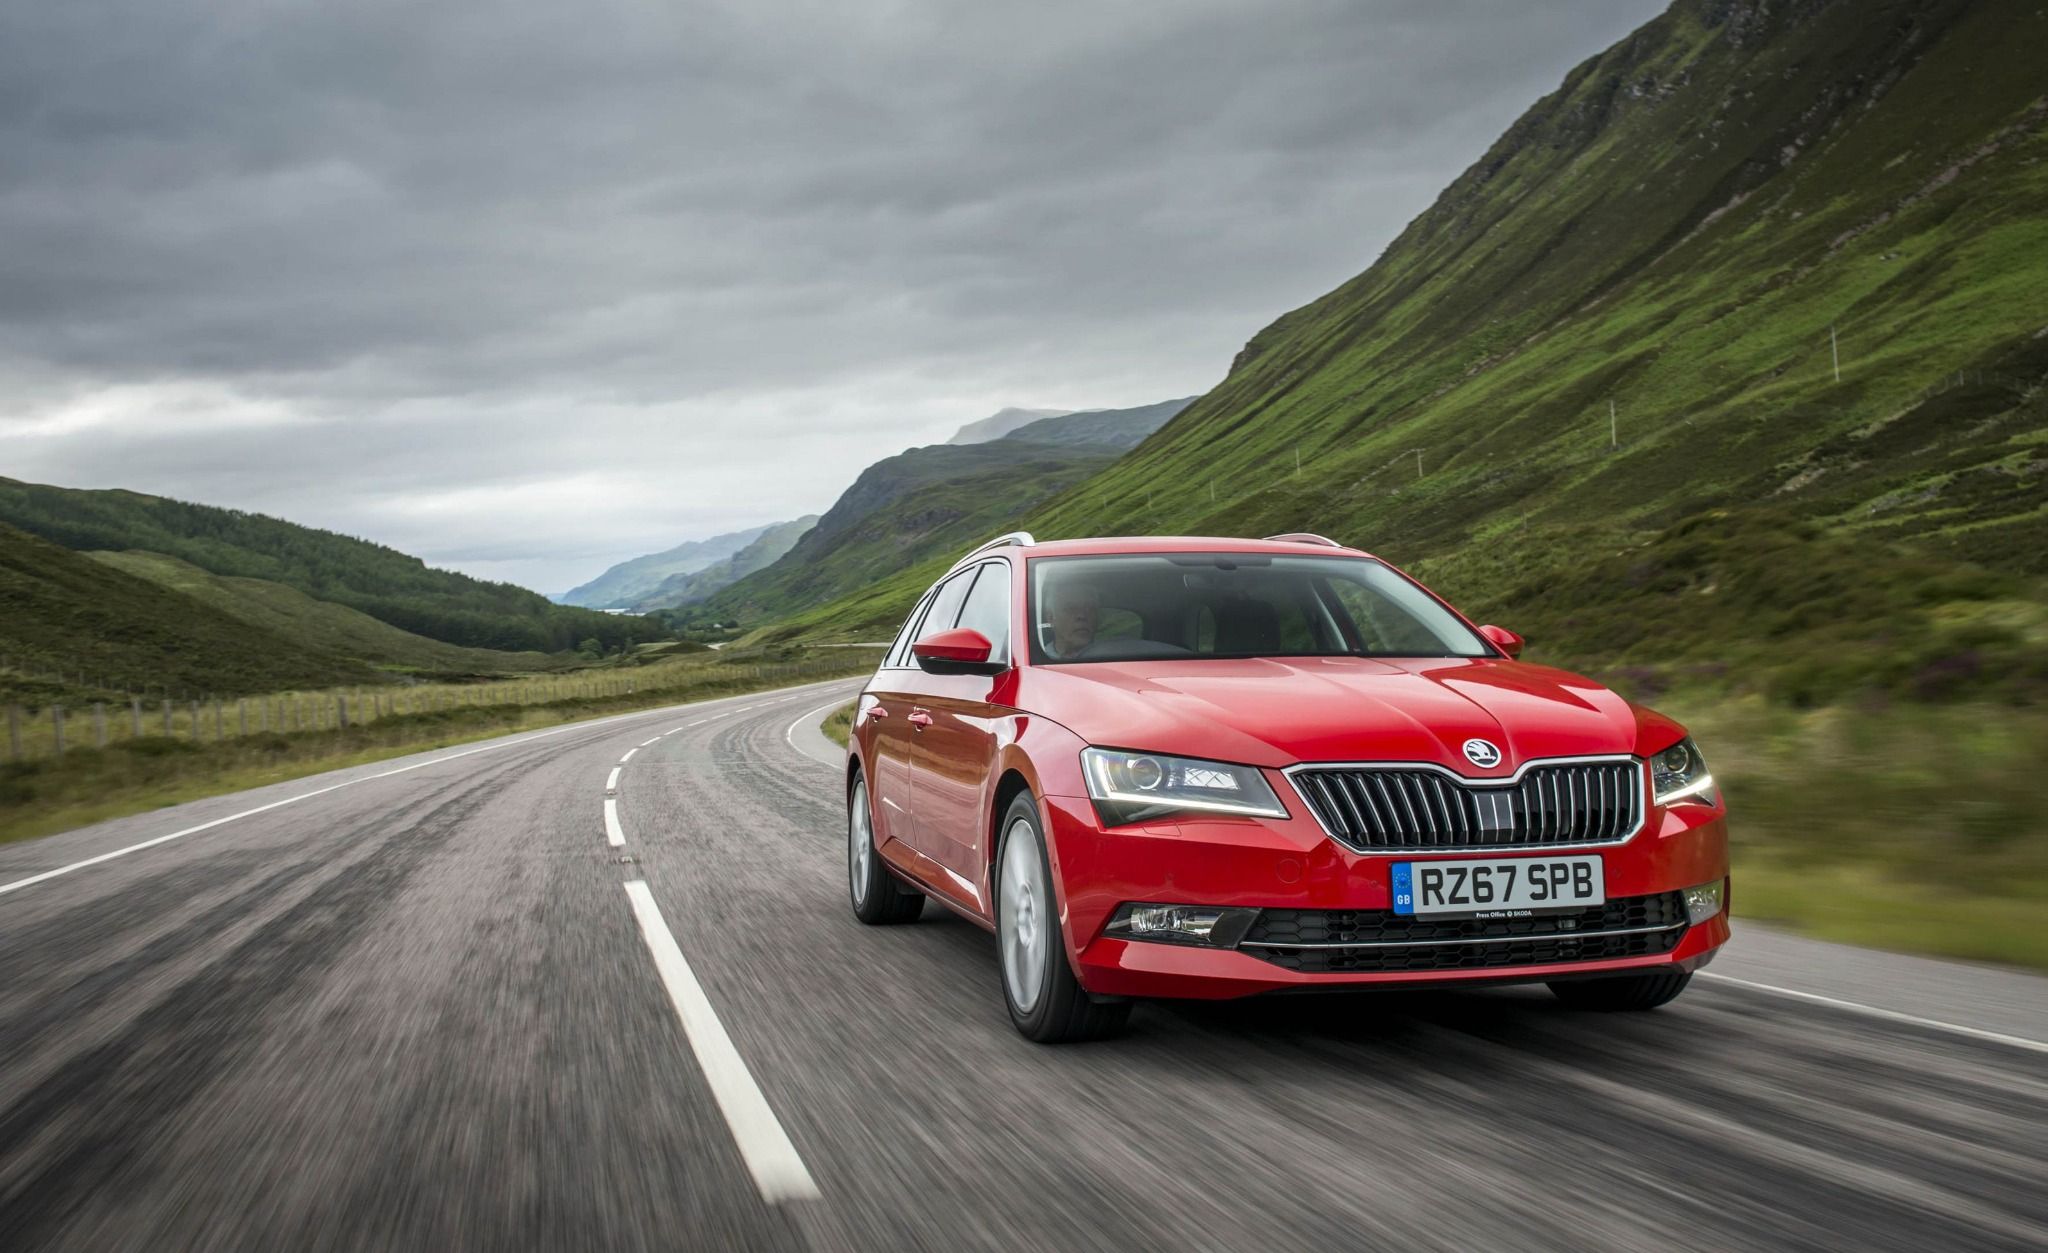 Red Skoda Superb driving on a road